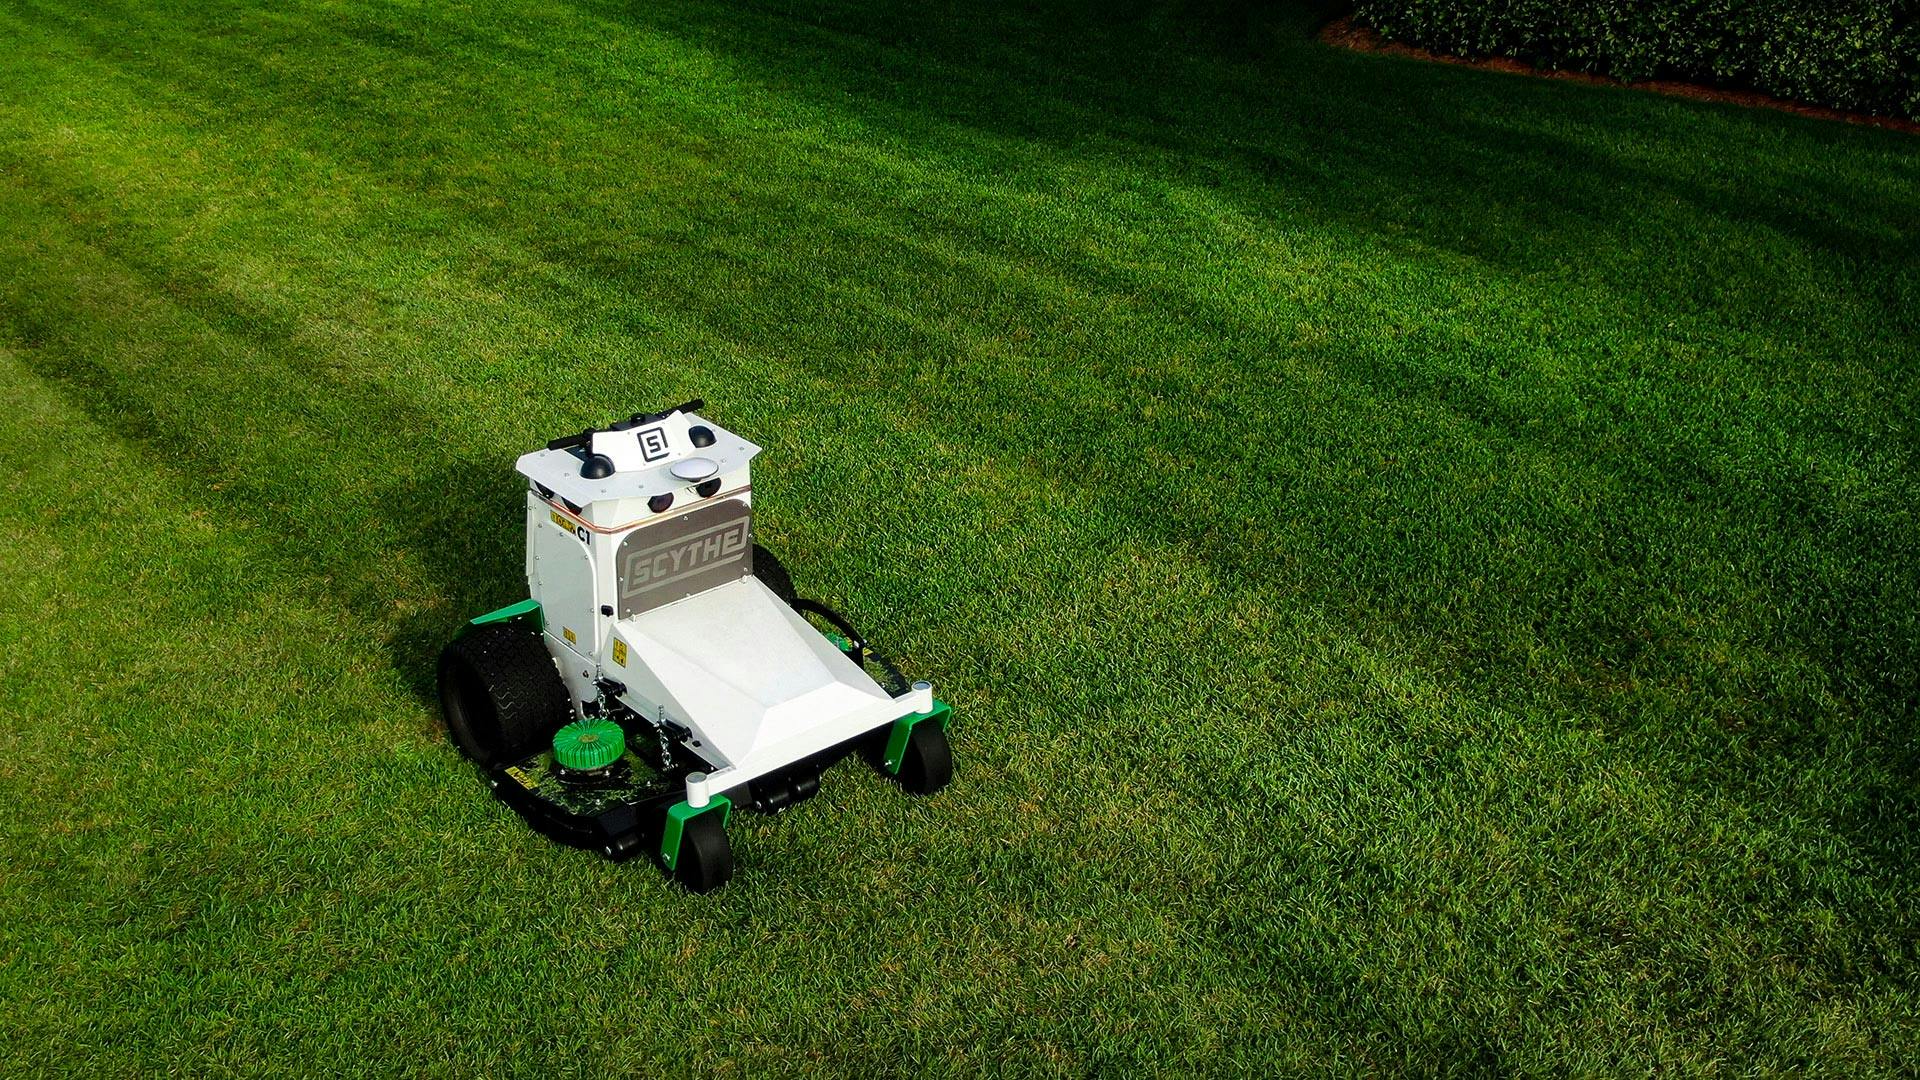 The Future of Mowing.